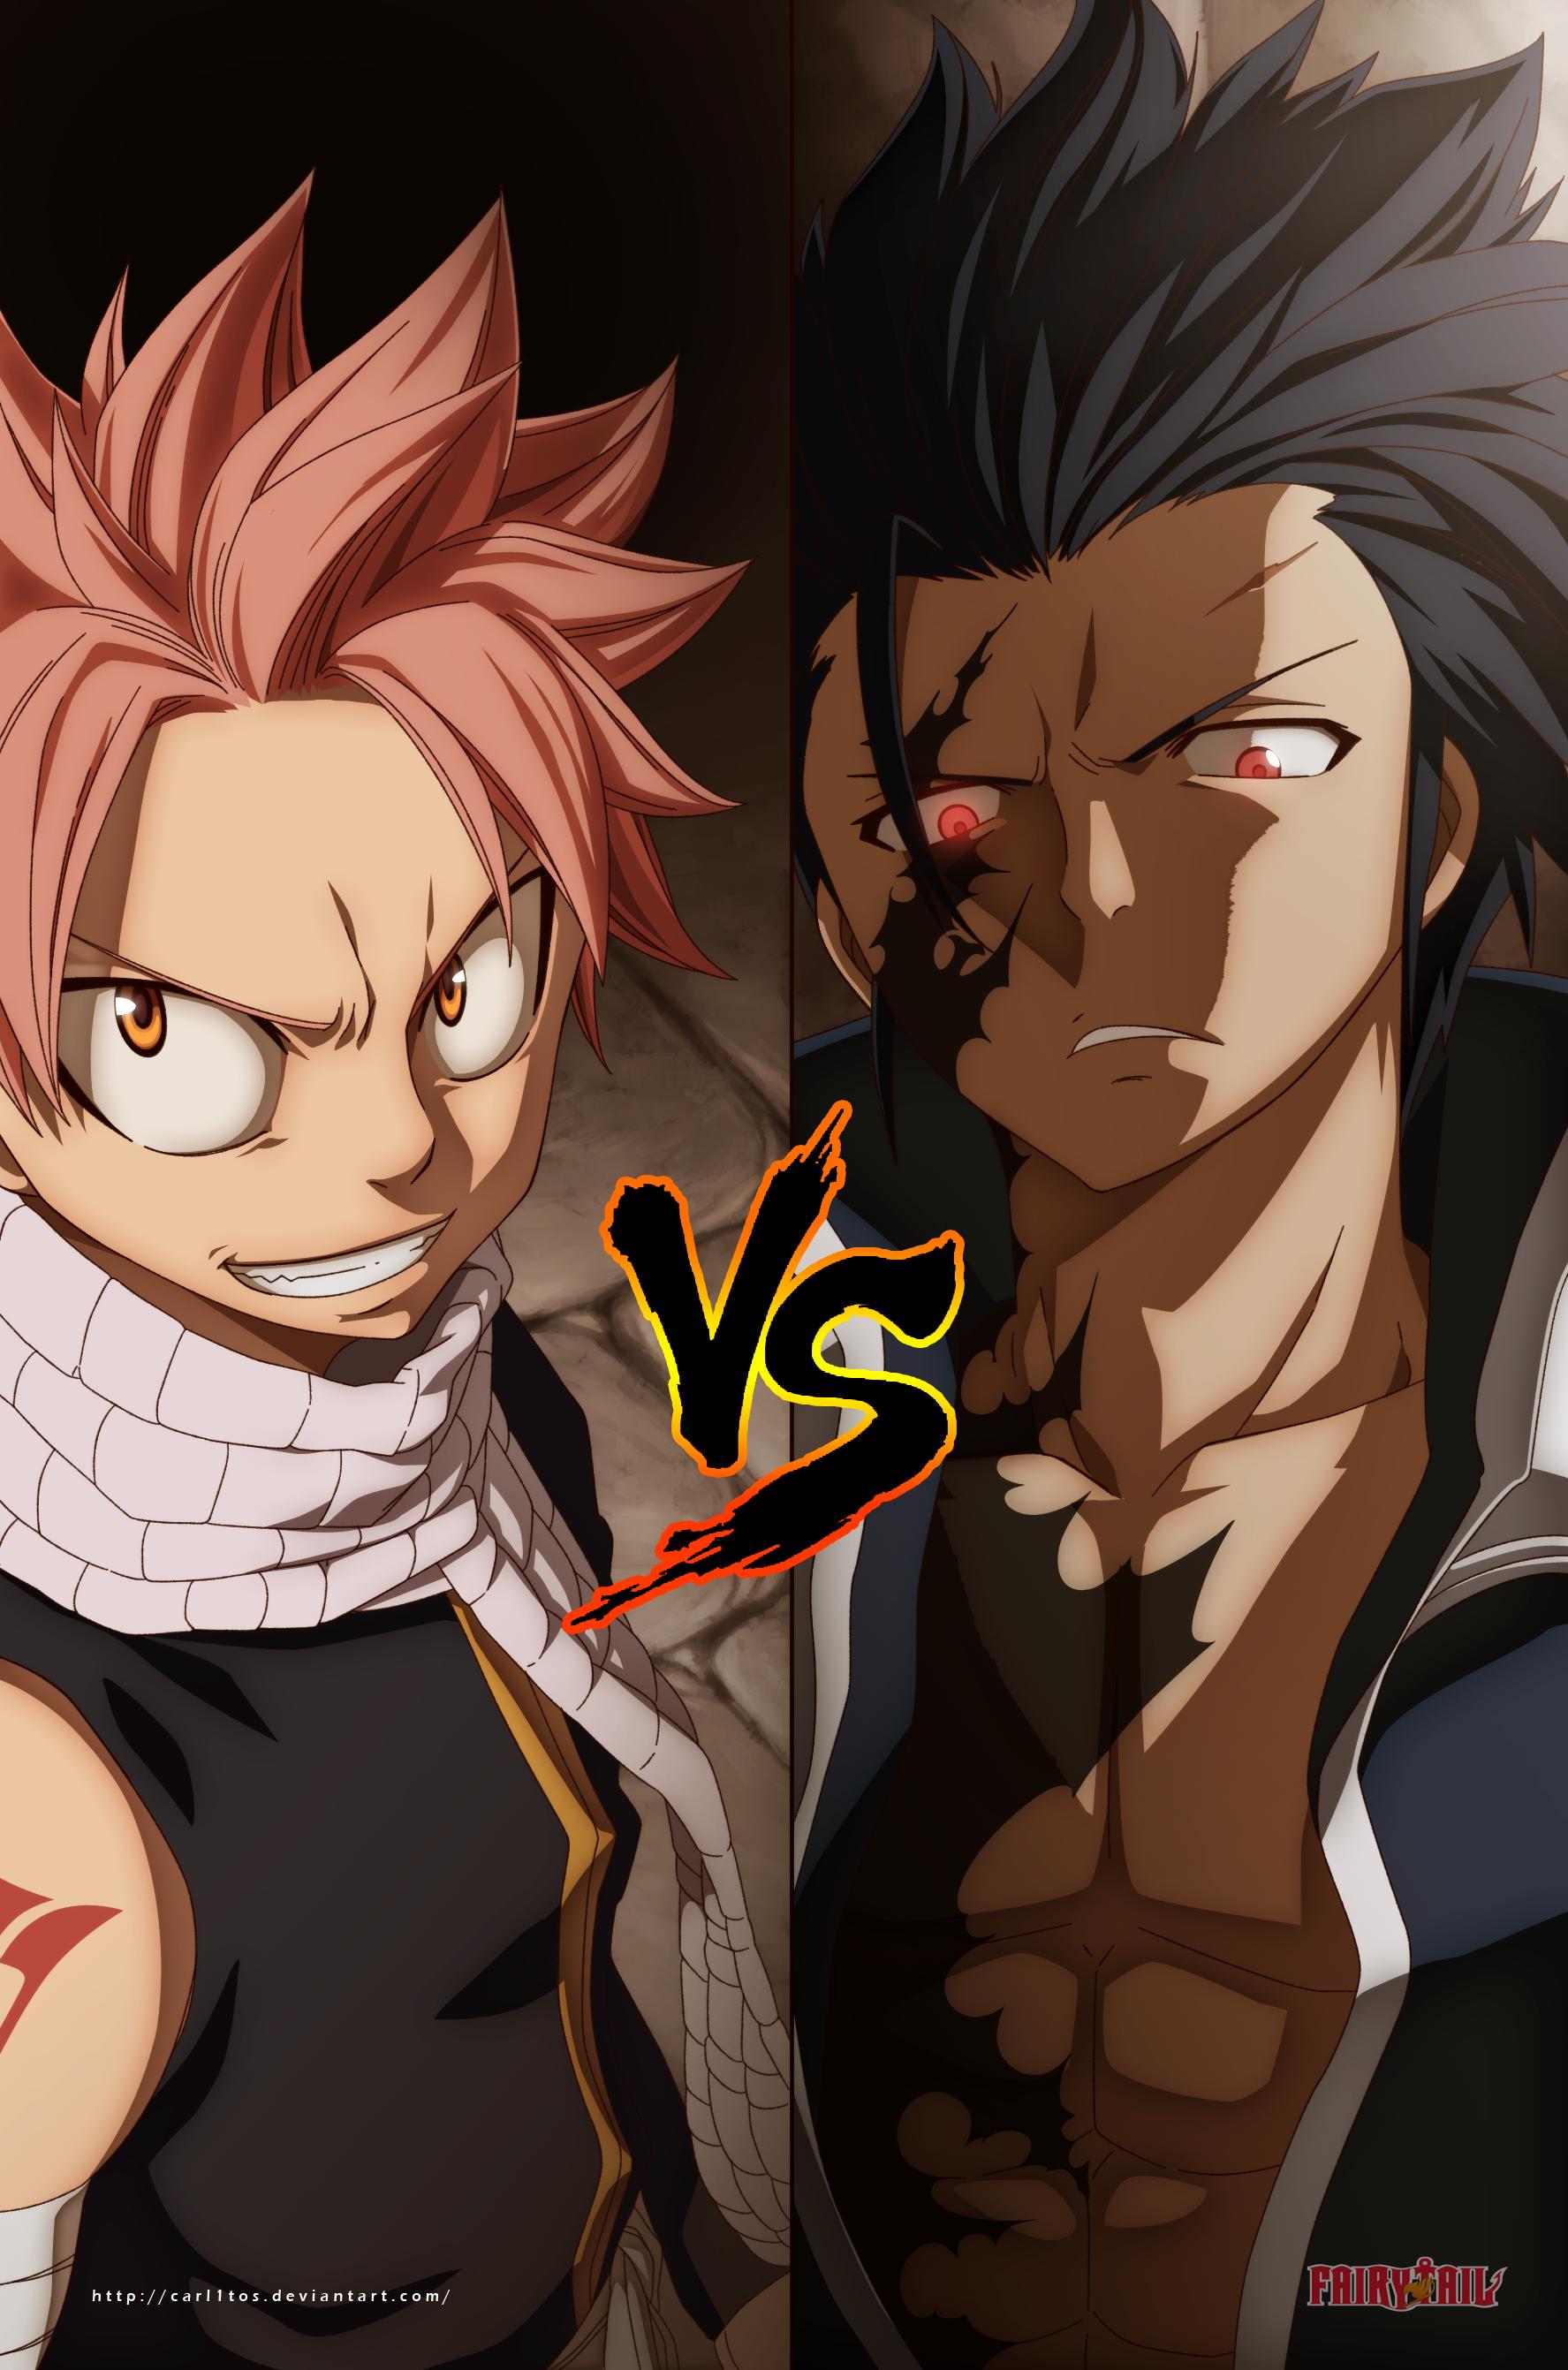 1775 x 2683 · png - Fairy Tail 427 - Natsu vs Gray by carl1tos on DeviantArt